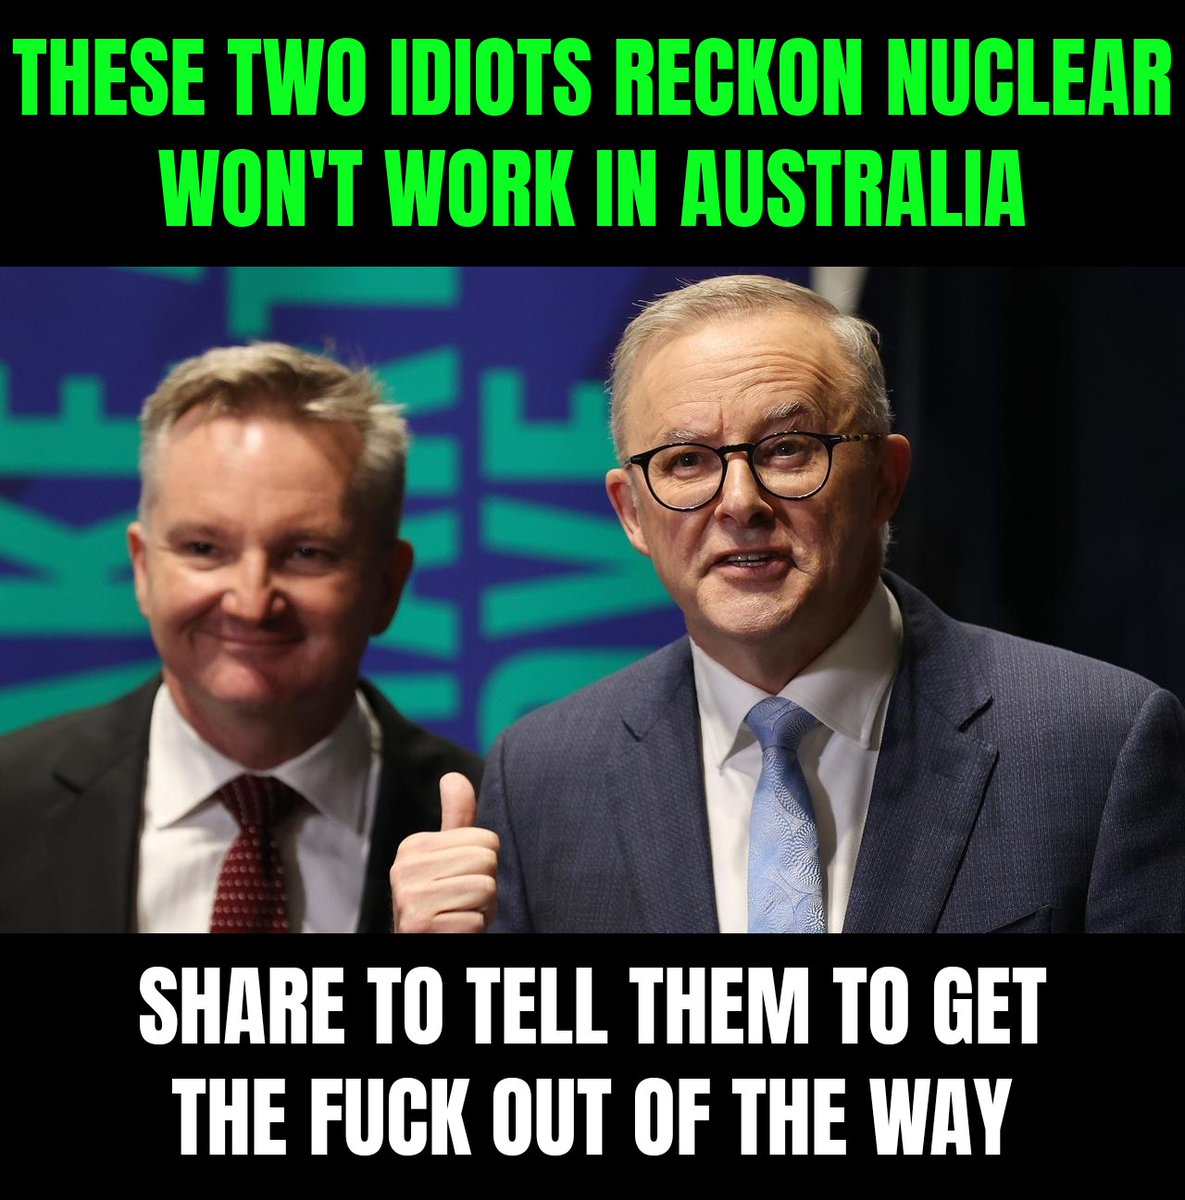 Blackout and Elmer are ideologically driven ludites. Their pigheaded refusal to consider nuclear power is a complete joke, based on outdated thinking straight out of the 60s and 70s Times have changed, and the majority of Australians now support nuclear power.